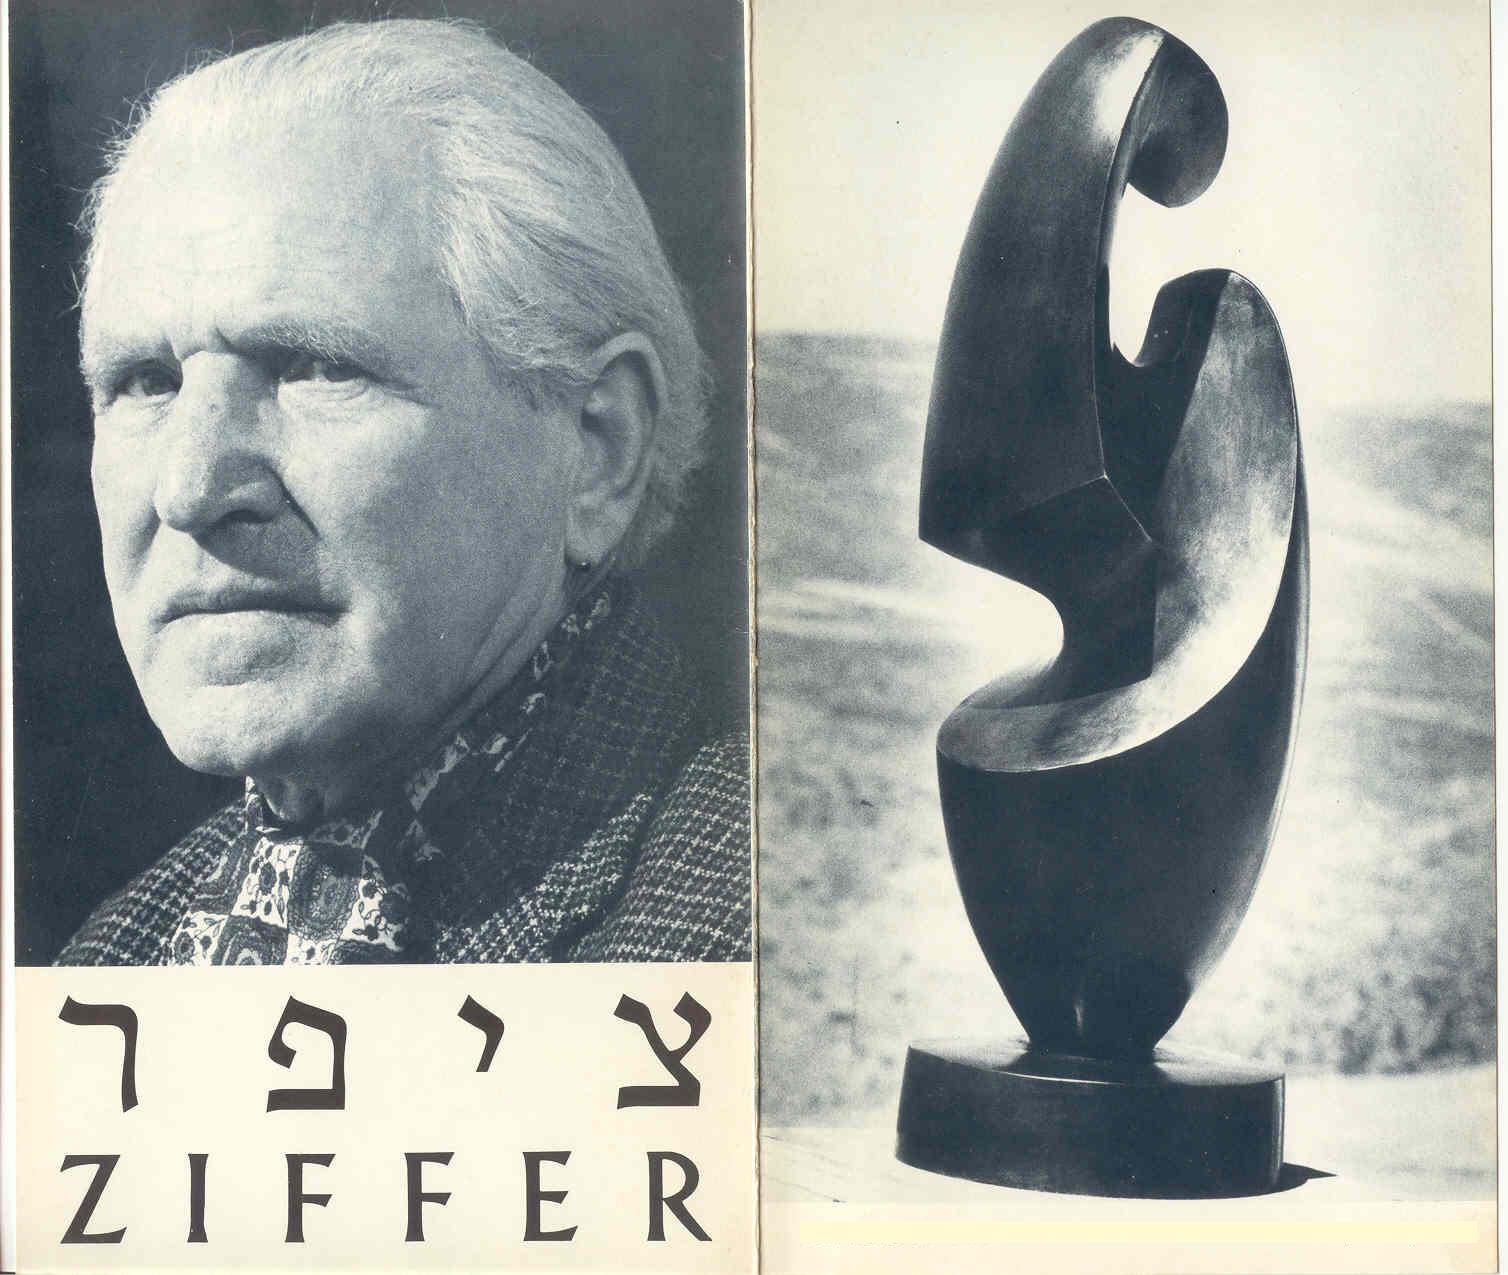 Ziffer Moshe the sculpture